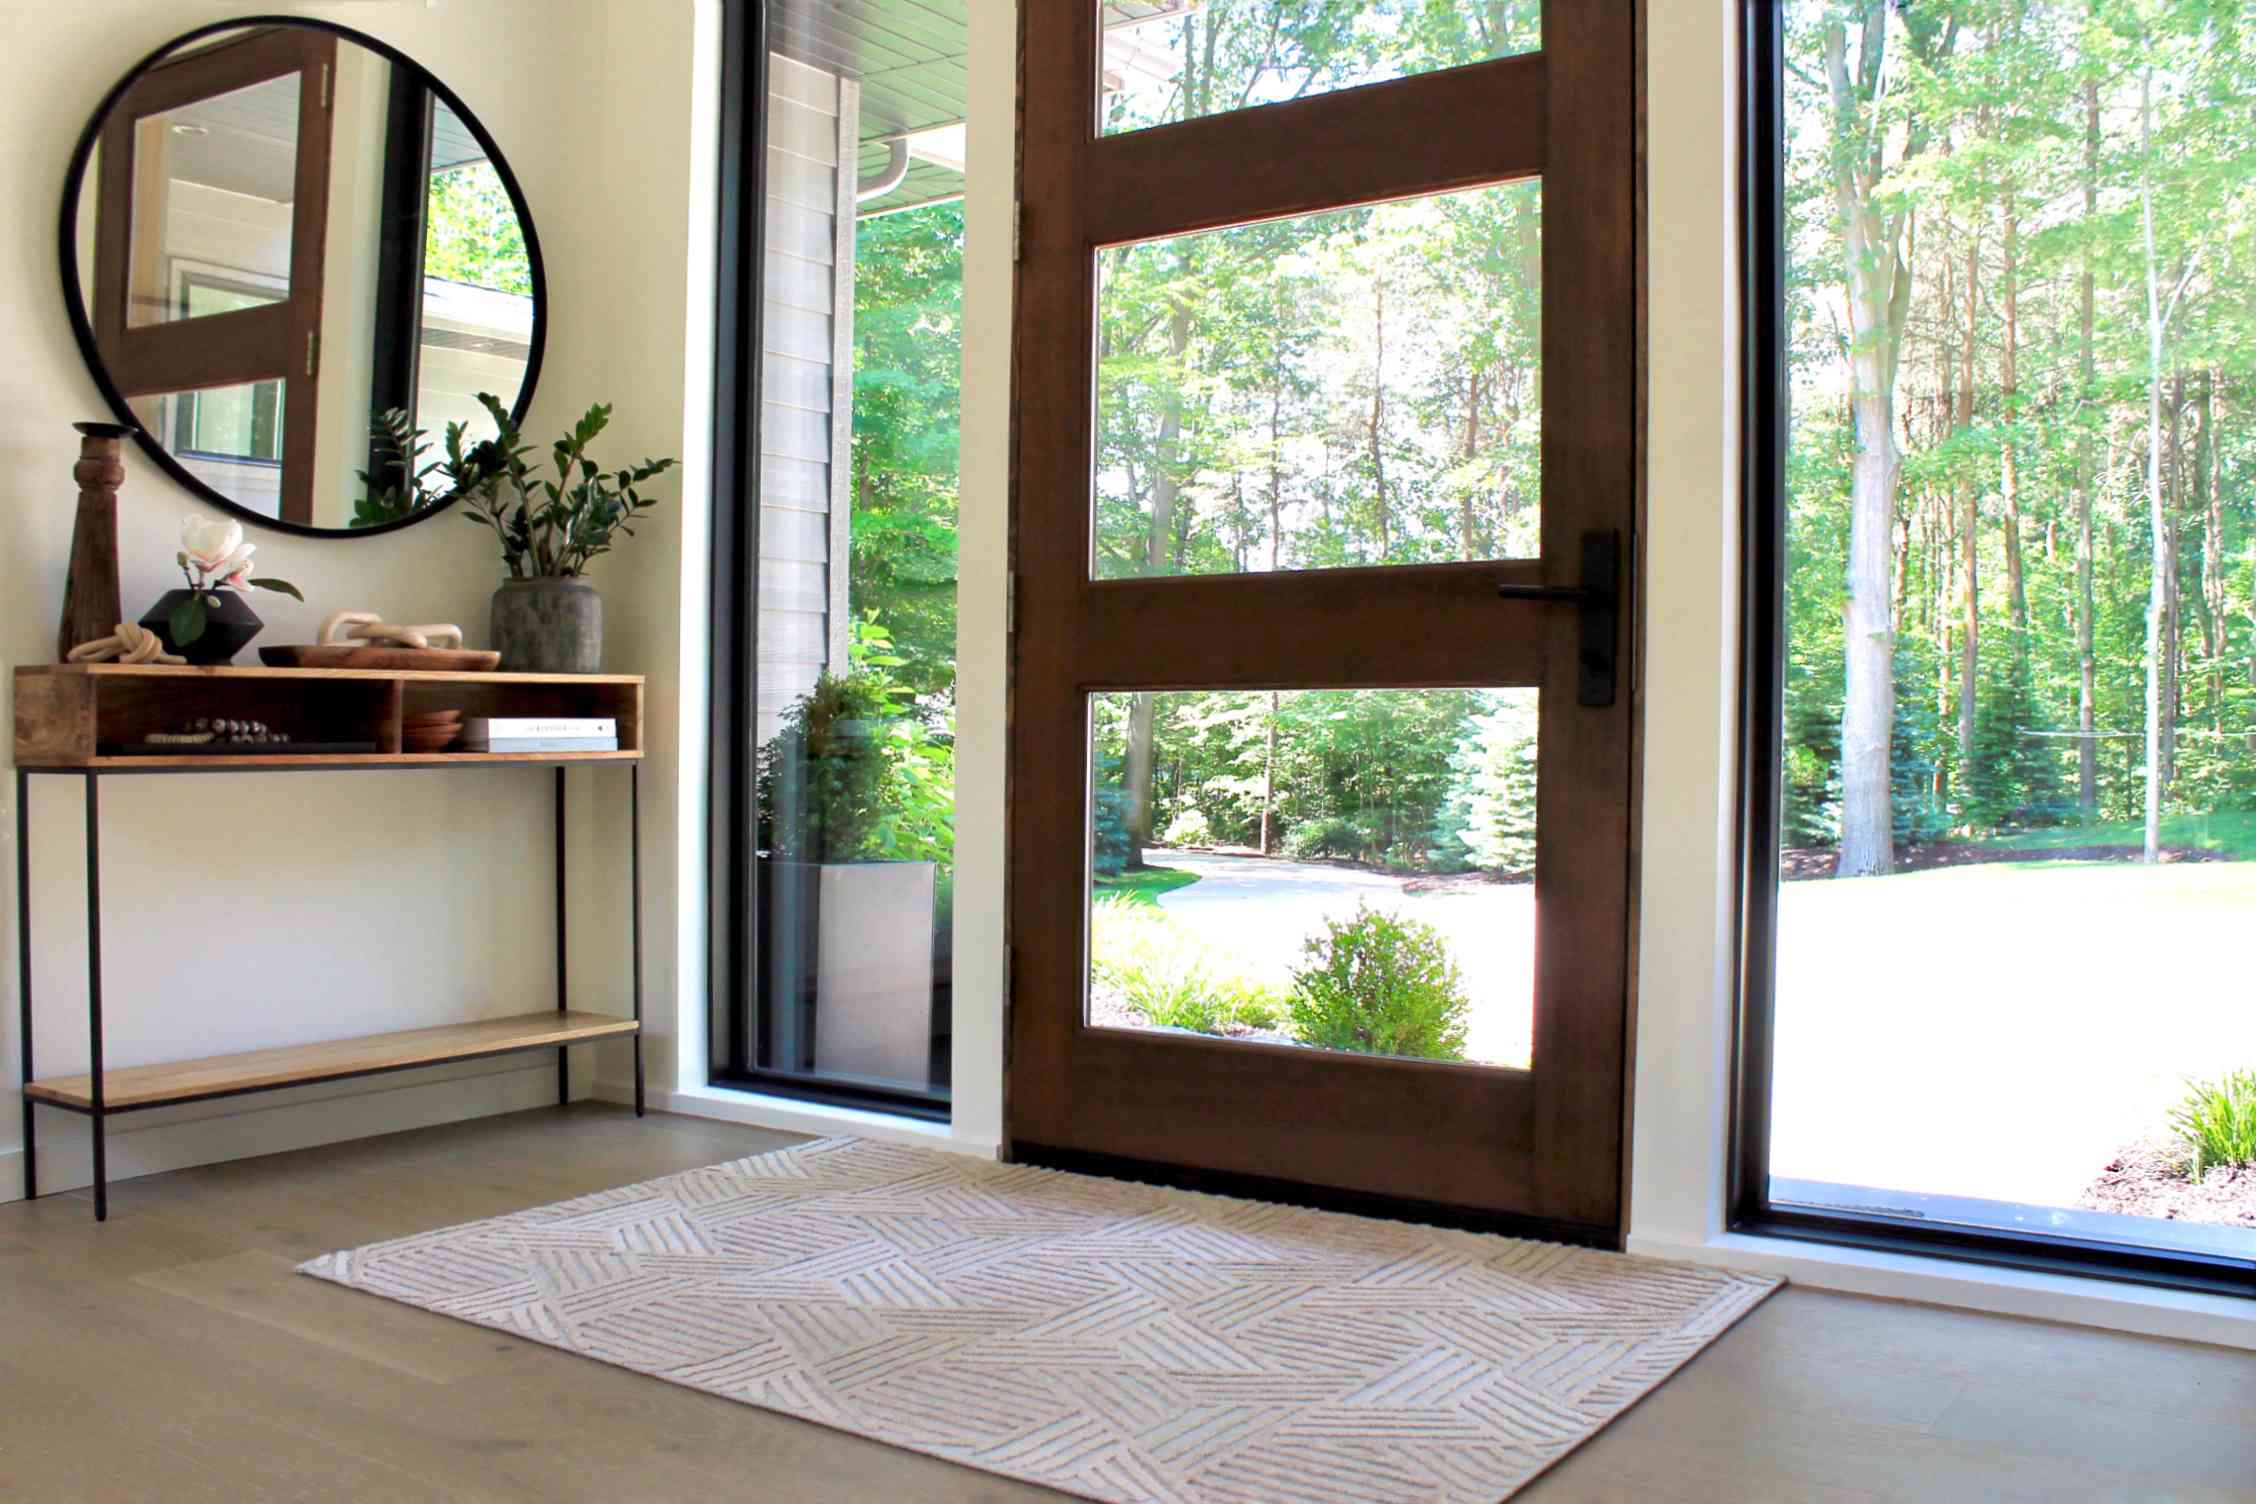 9 Entryway Ideas That Make a Stunning First Impression - Savage House TC